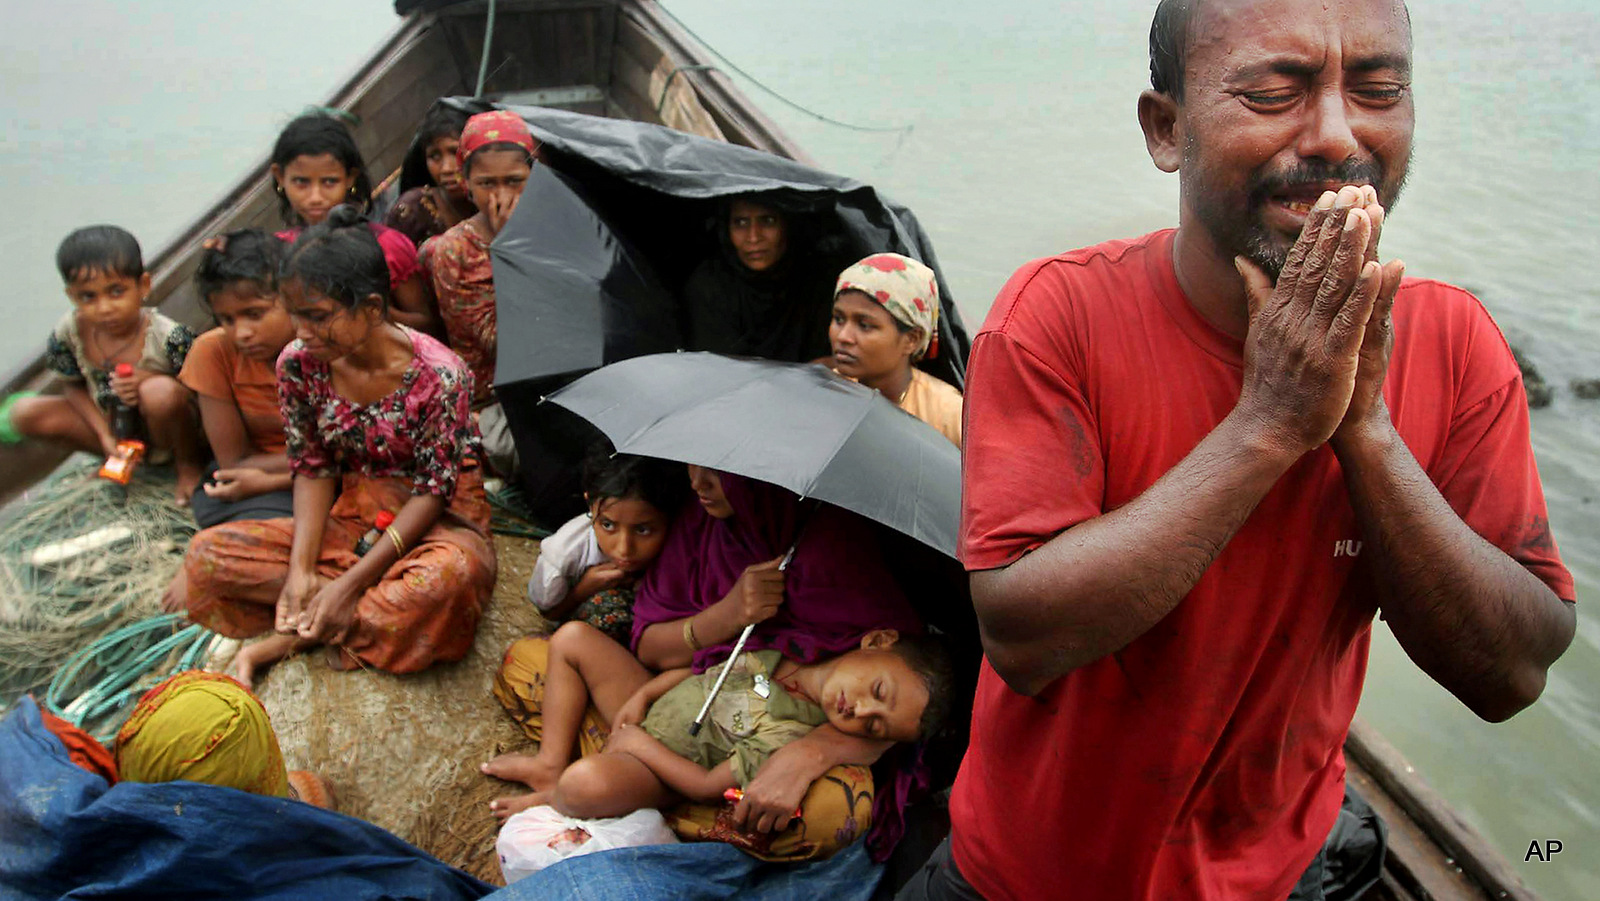 A Rohingya Muslim man who fled Myanmar to Bangladesh to escape religious violence, cries as he pleads from a boat after he and others were intercepted by Bangladeshi border authorities in Taknaf, Bangladesh. Two recent shipwrecks in the Mediterranean Sea believed to have taken the lives of as many as 1,300 asylum seekers and migrants has highlighted the escalating flow of people fleeing persecution, war and economic difficulties in their homelands.